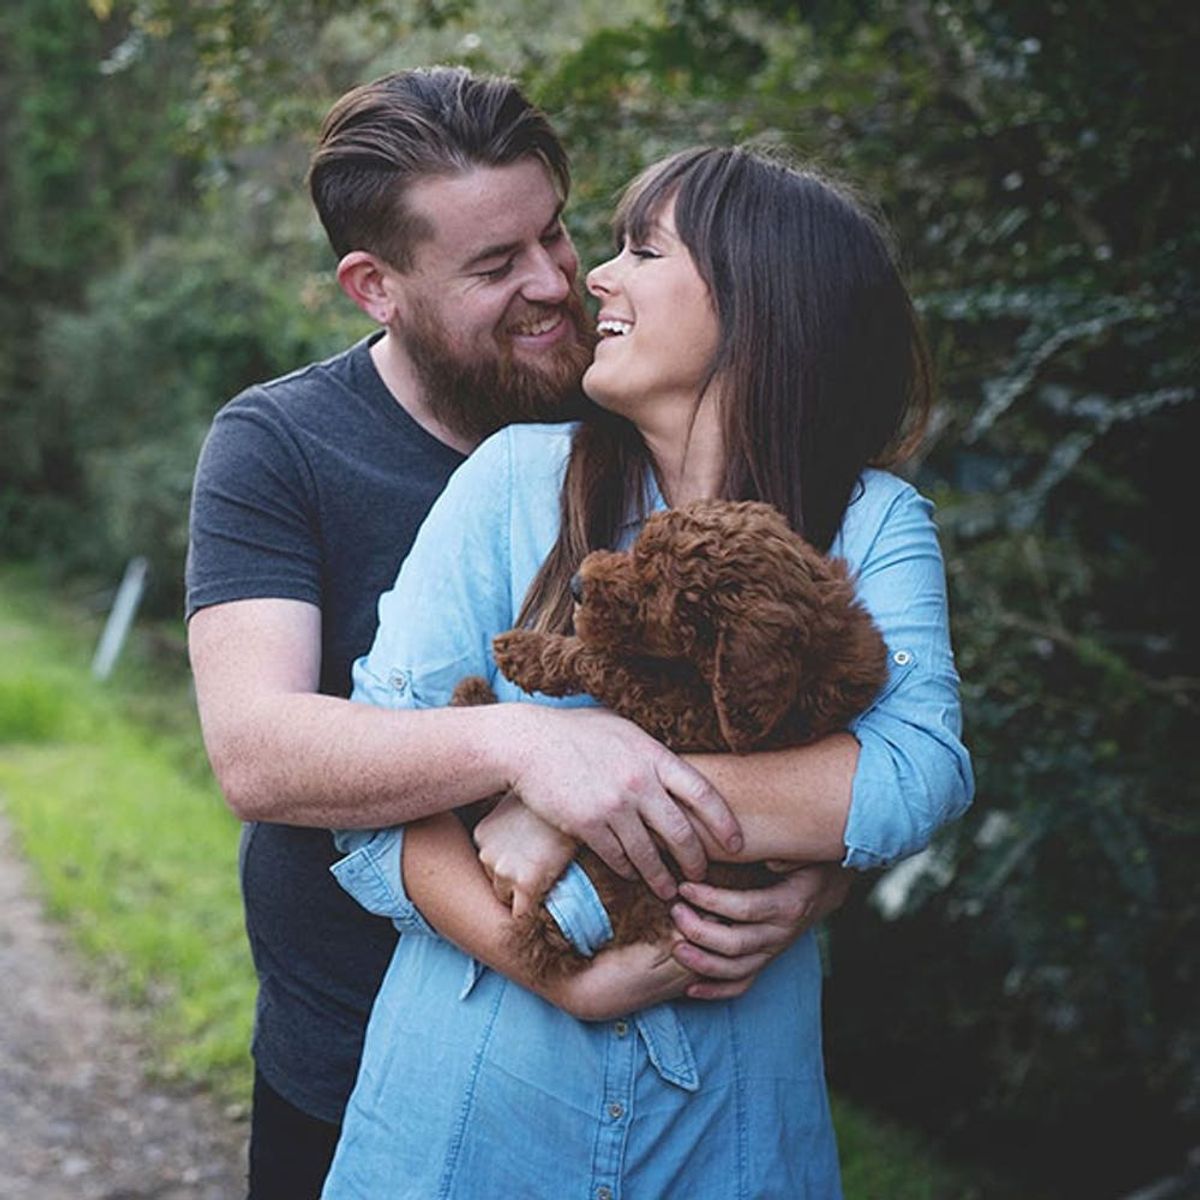 The Reason Why This Couple Did a Newborn Photo Shoot With Their Puppy Is Genius